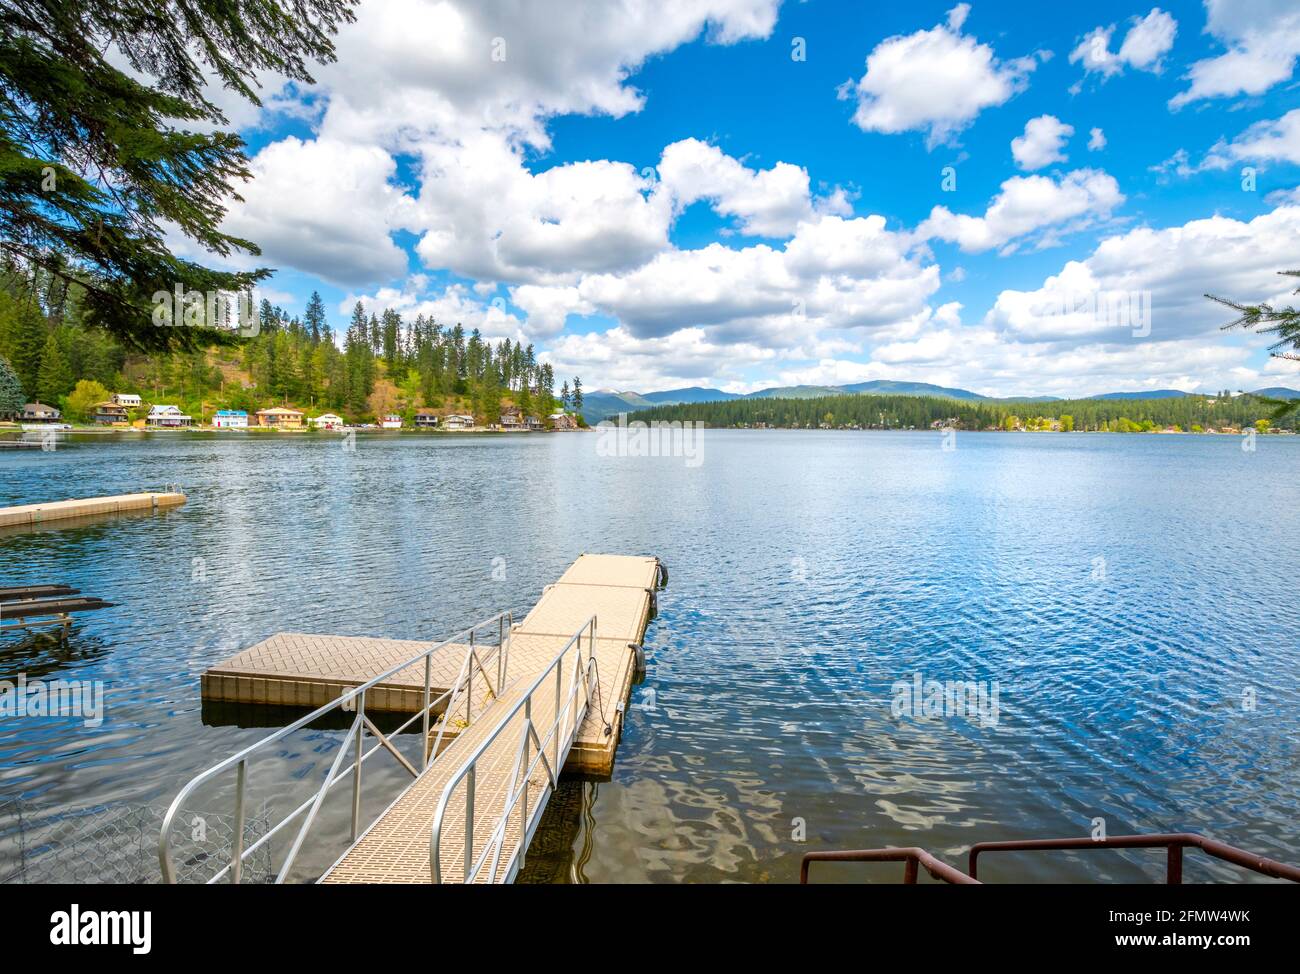 A small dock from a home in the rural community of Newman Lake, Washington, USA with other waterfront homes and boat slips in view. Stock Photo